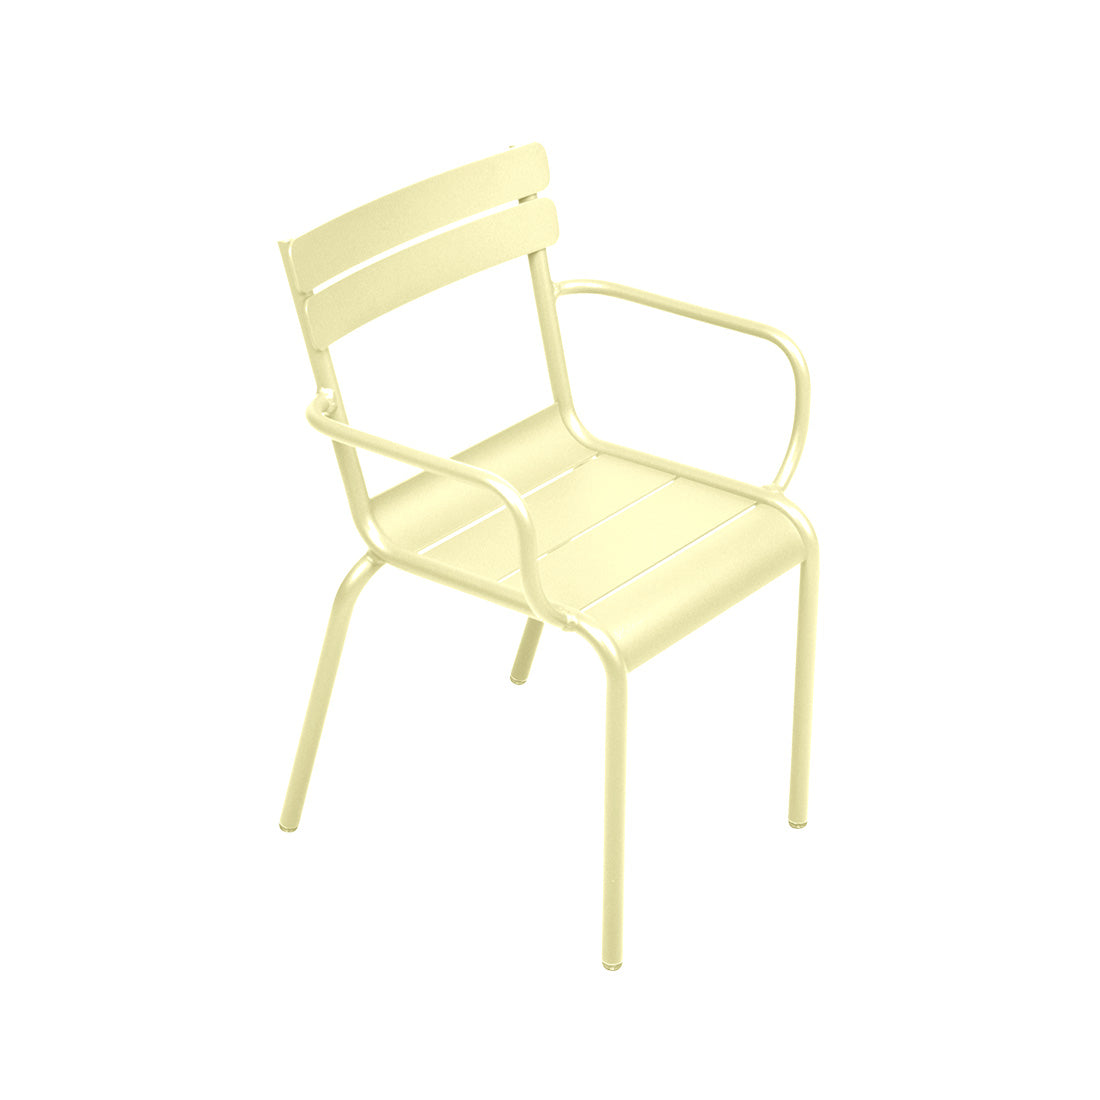 Fermob Luxembourg Kid Chair - bonmarche